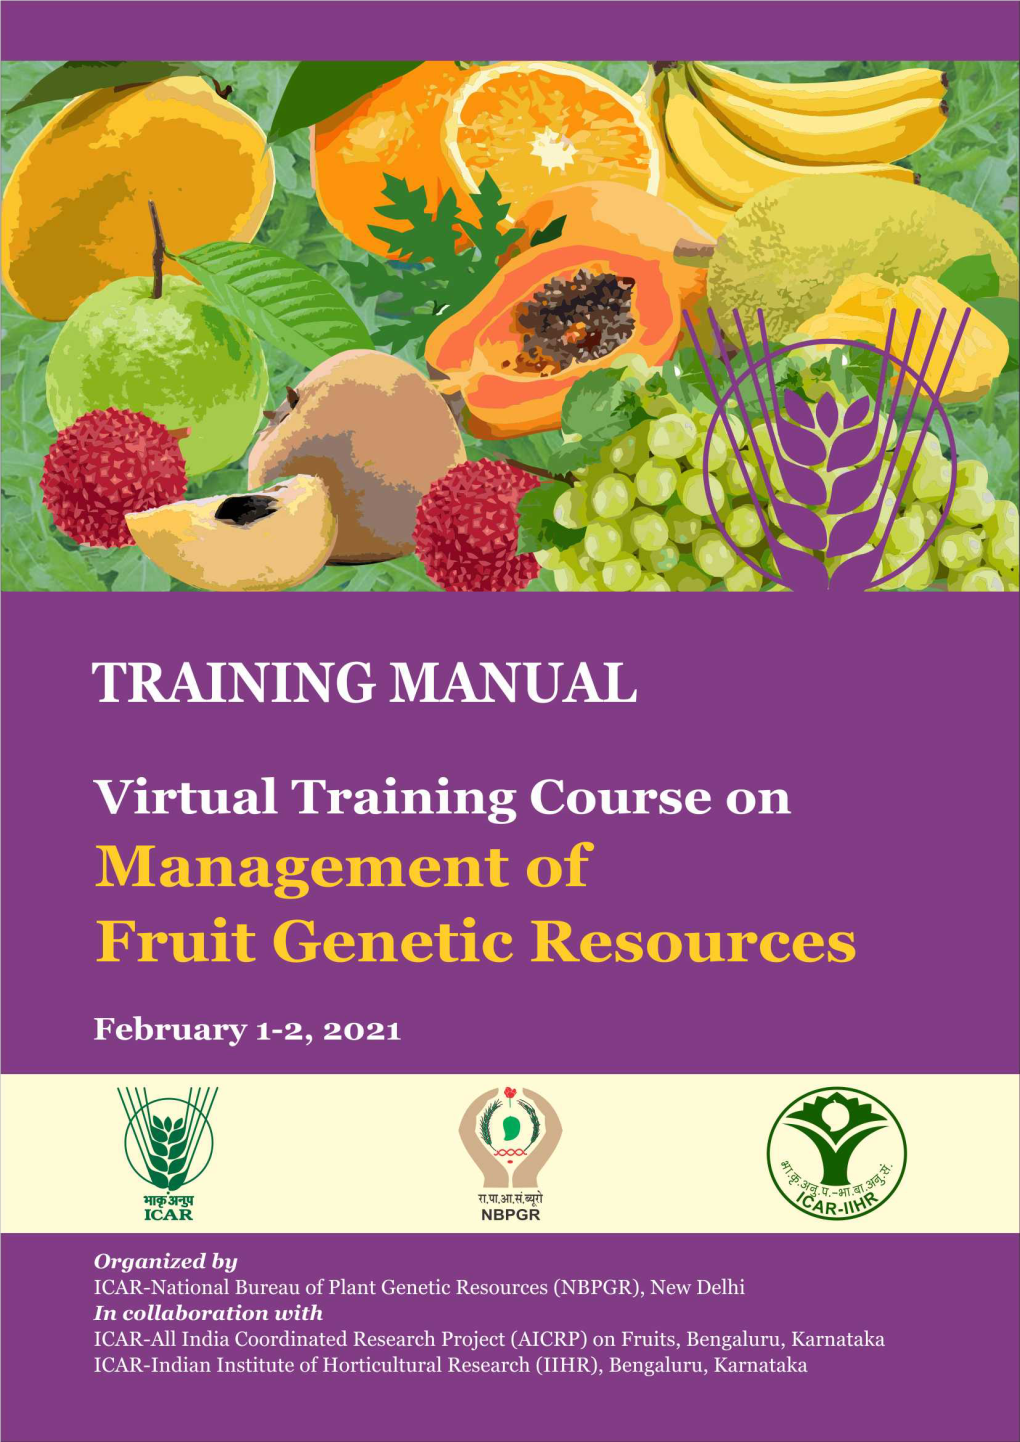 "Management of Fruit Genetic Resources" Held On